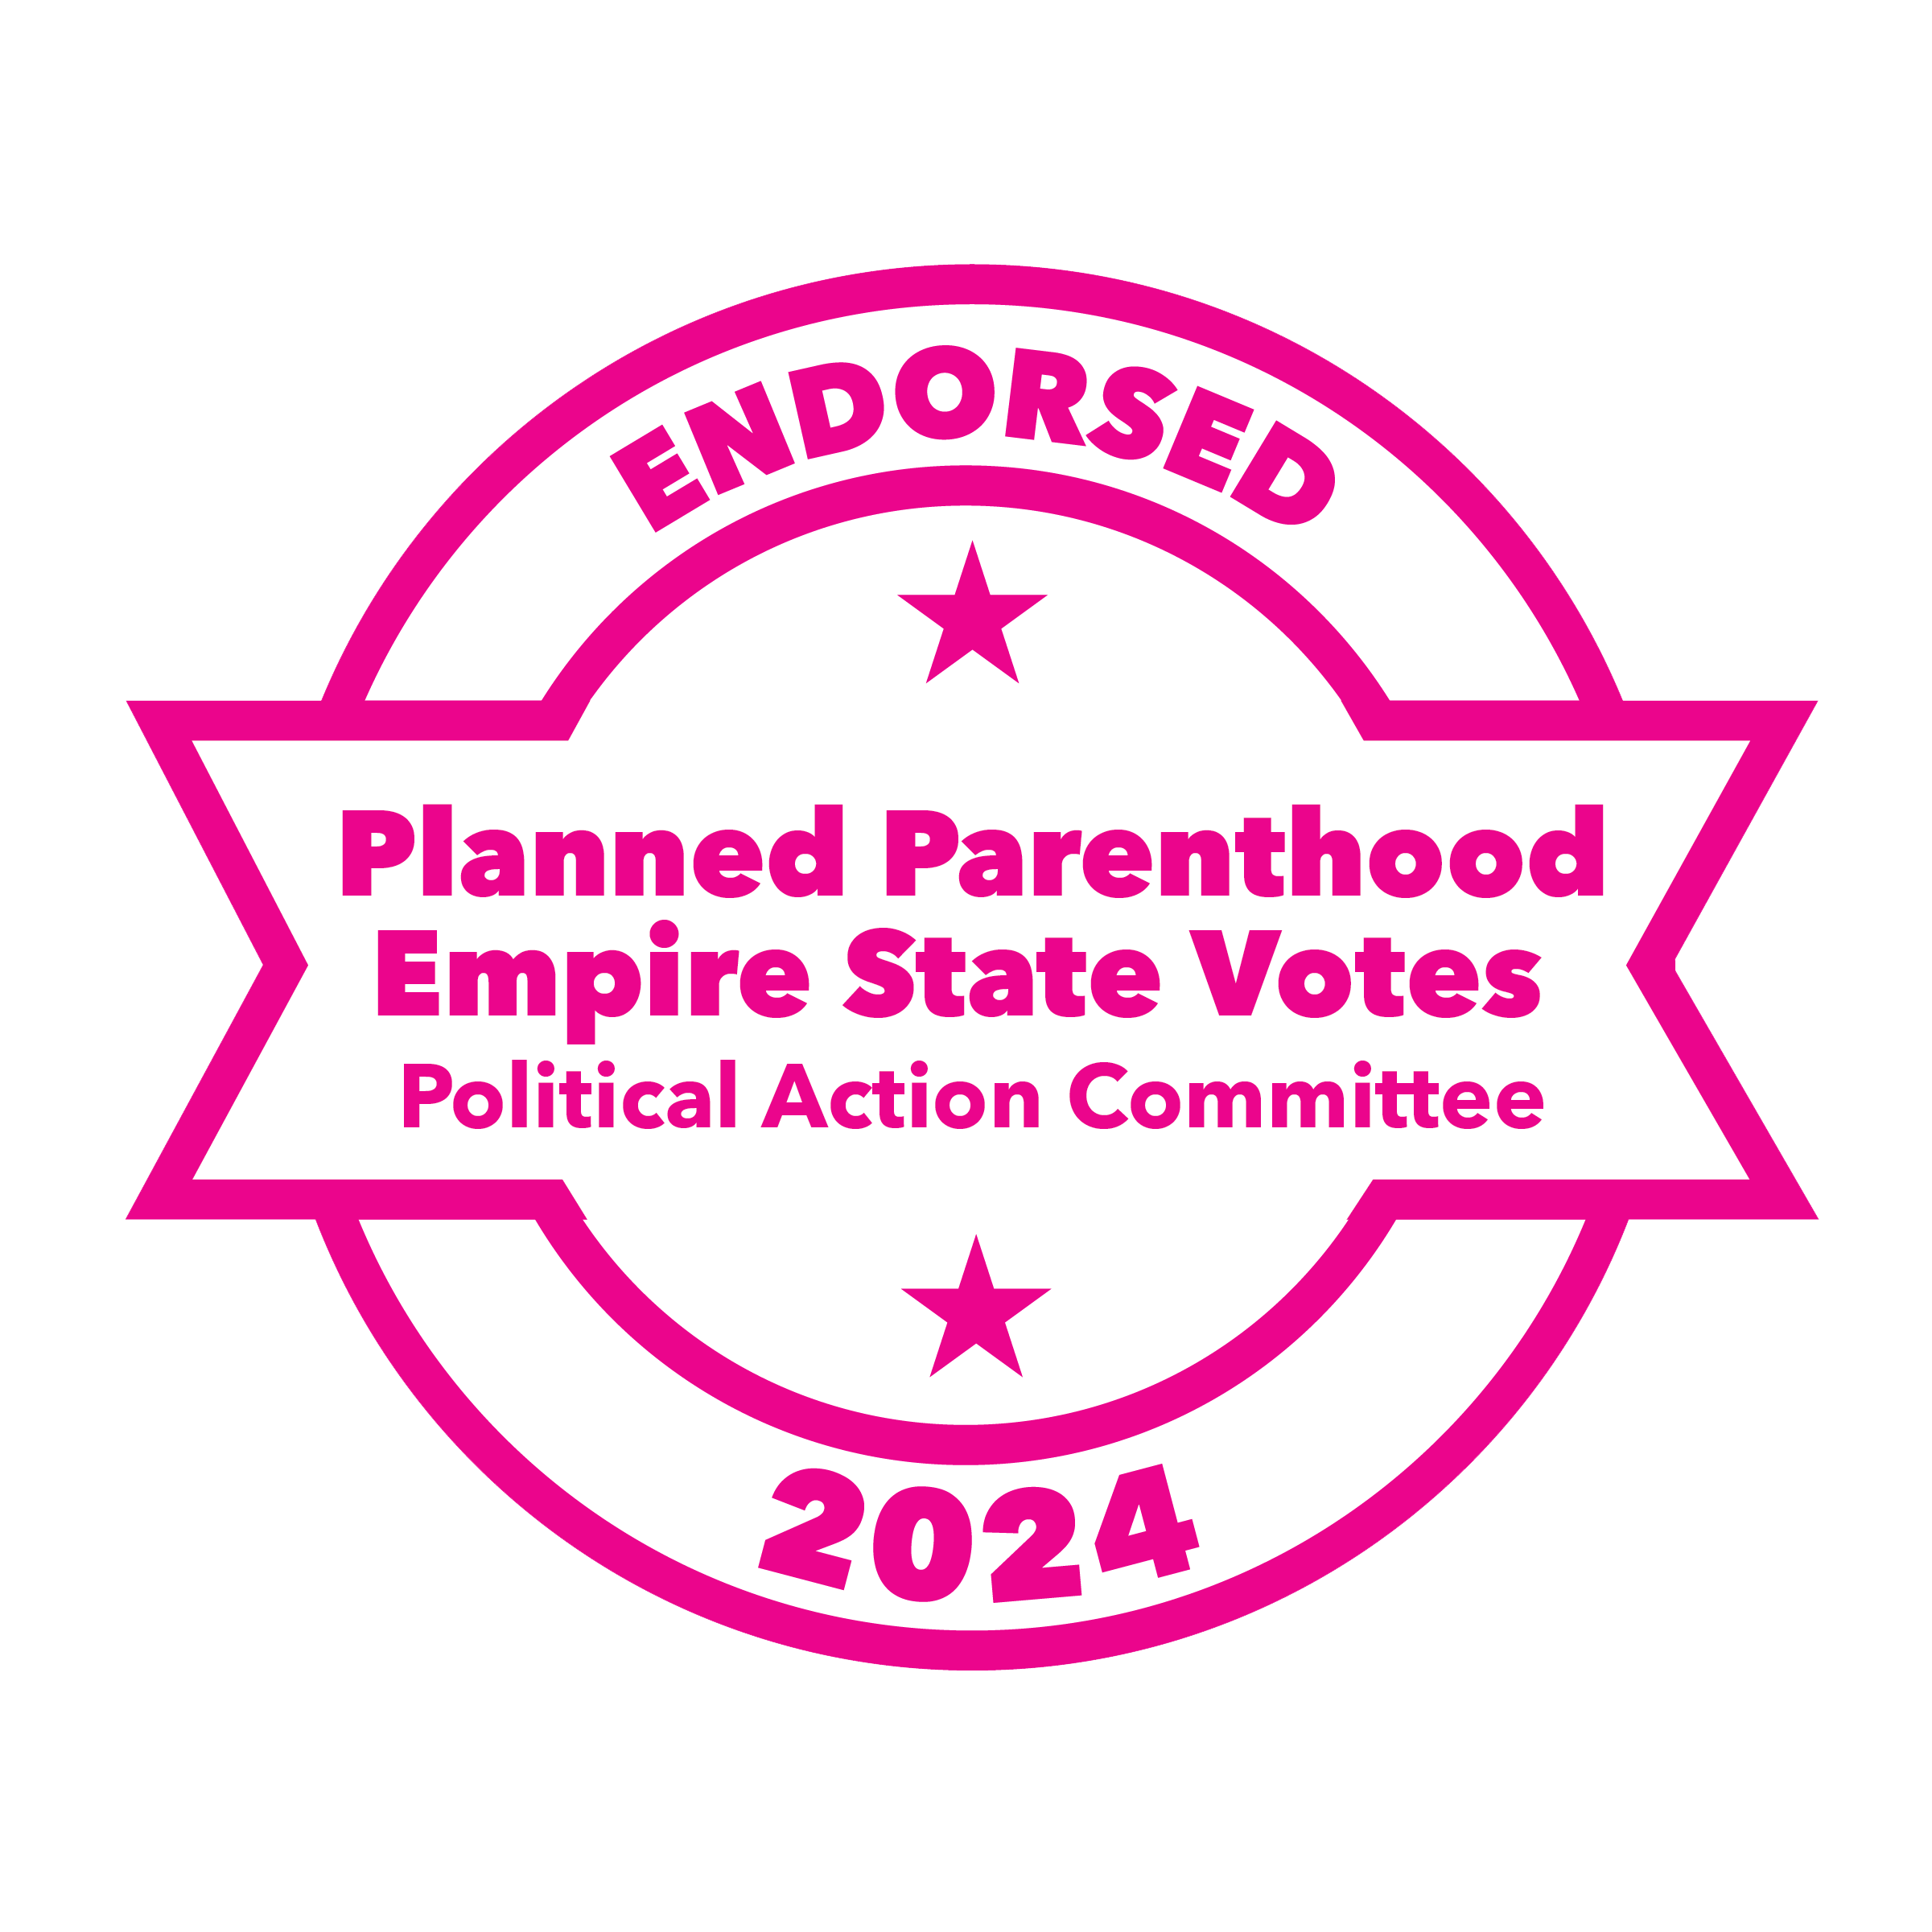 Planned Parenthood Empire State Endorsement Seal